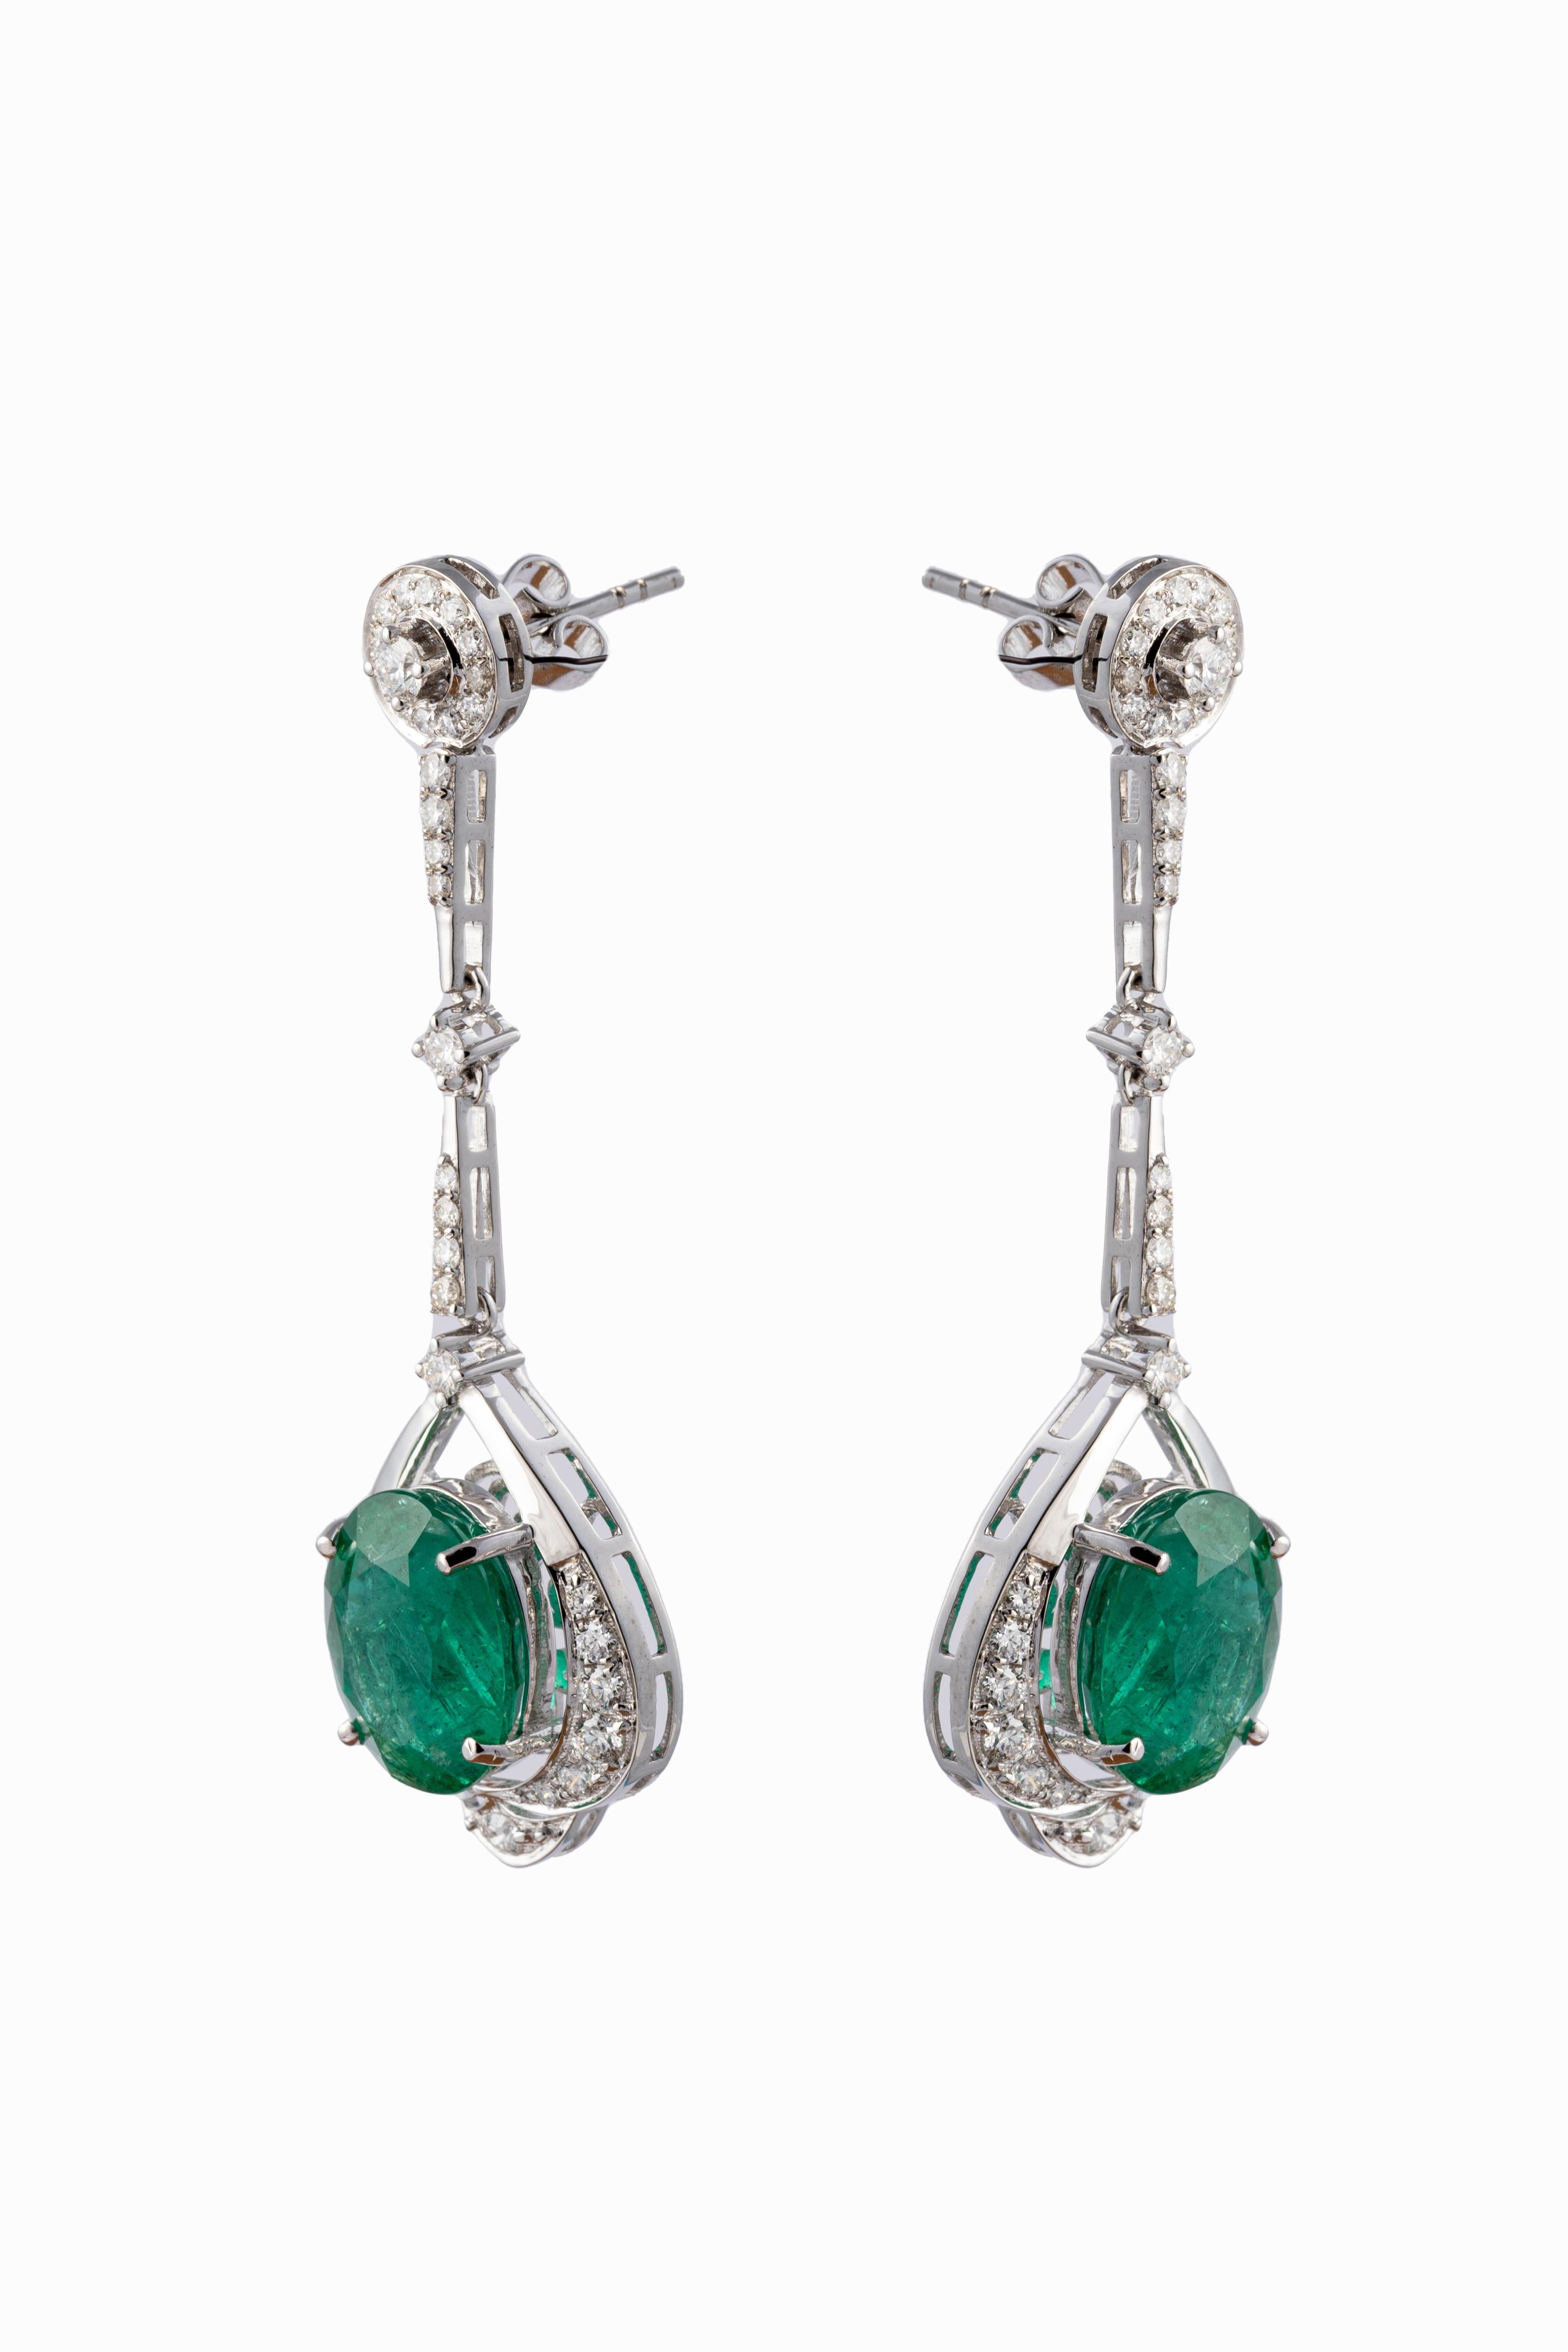 This is stunning natural Zambian earrings emerald is of very high quality and diamonds
are of very good clarity vsi and G colour
emeralds: 10.18cts
diamonds : 1.43cts
gold : 7.93gms
very hard to capture the true color and luster of the stone, I have